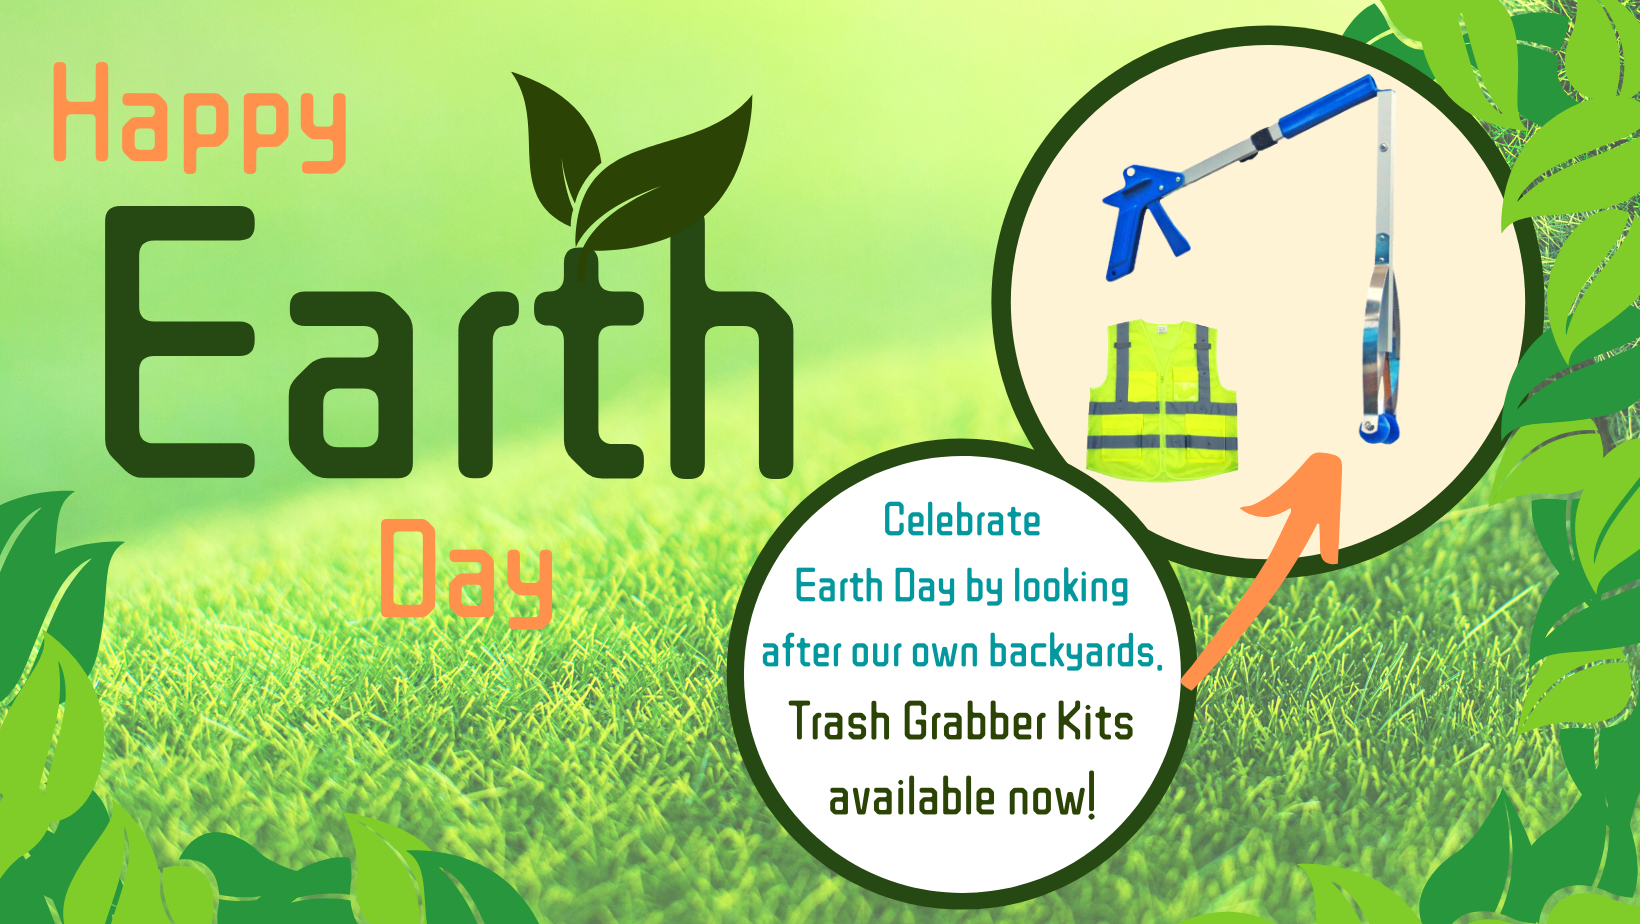 Clean Up for Earth Day!